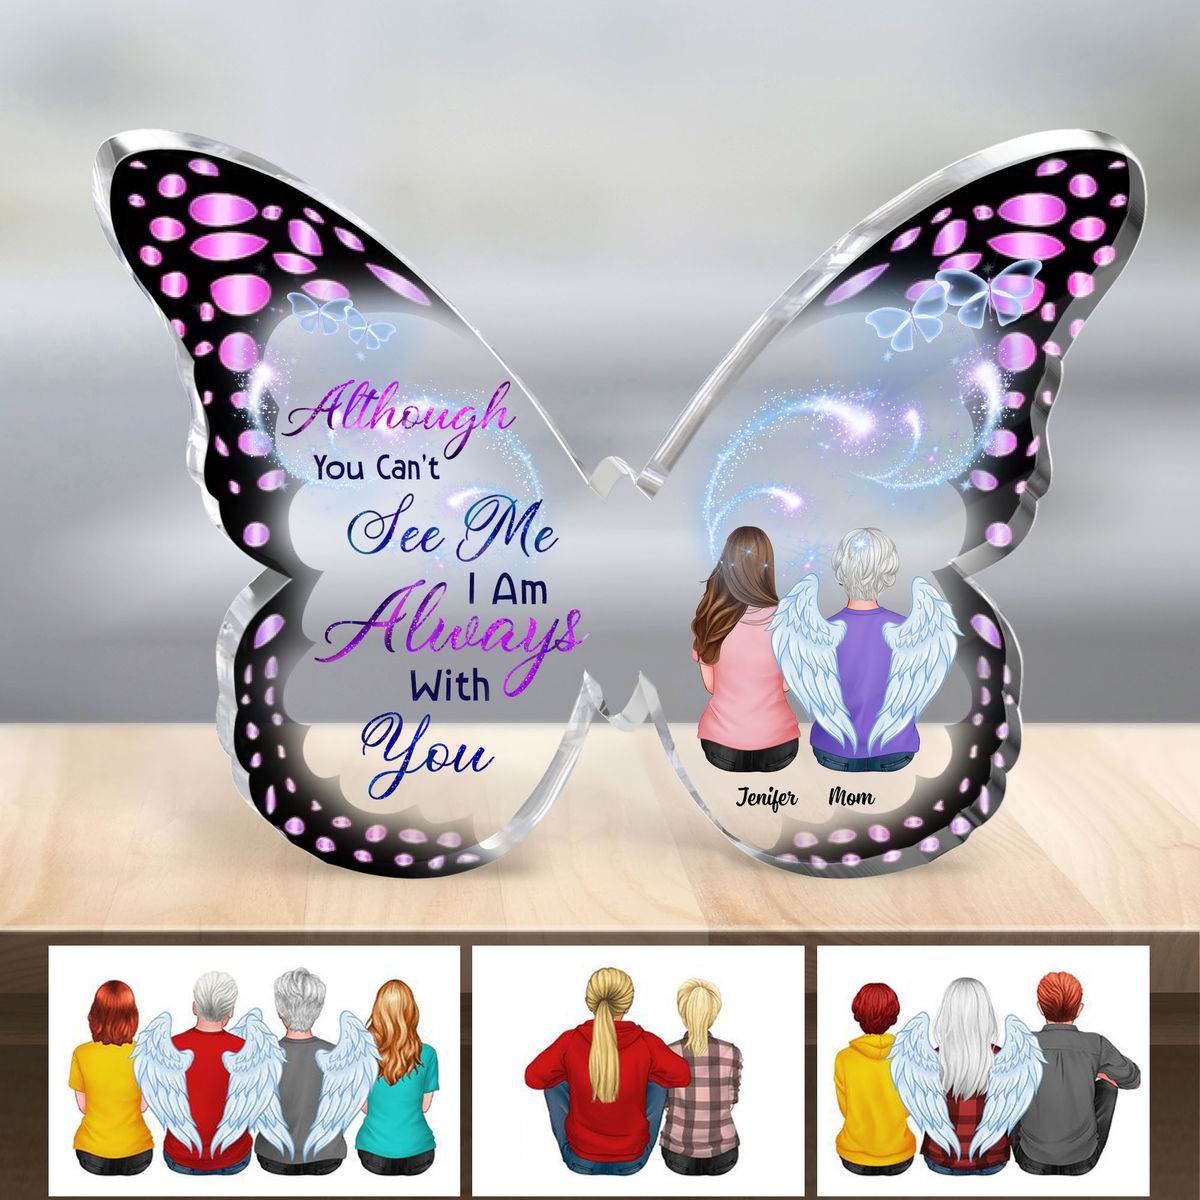 Memorial Family - Although You Can't See Me I Am Always With You (Custom Butterfly-Shaped Acrylic Keepsake)